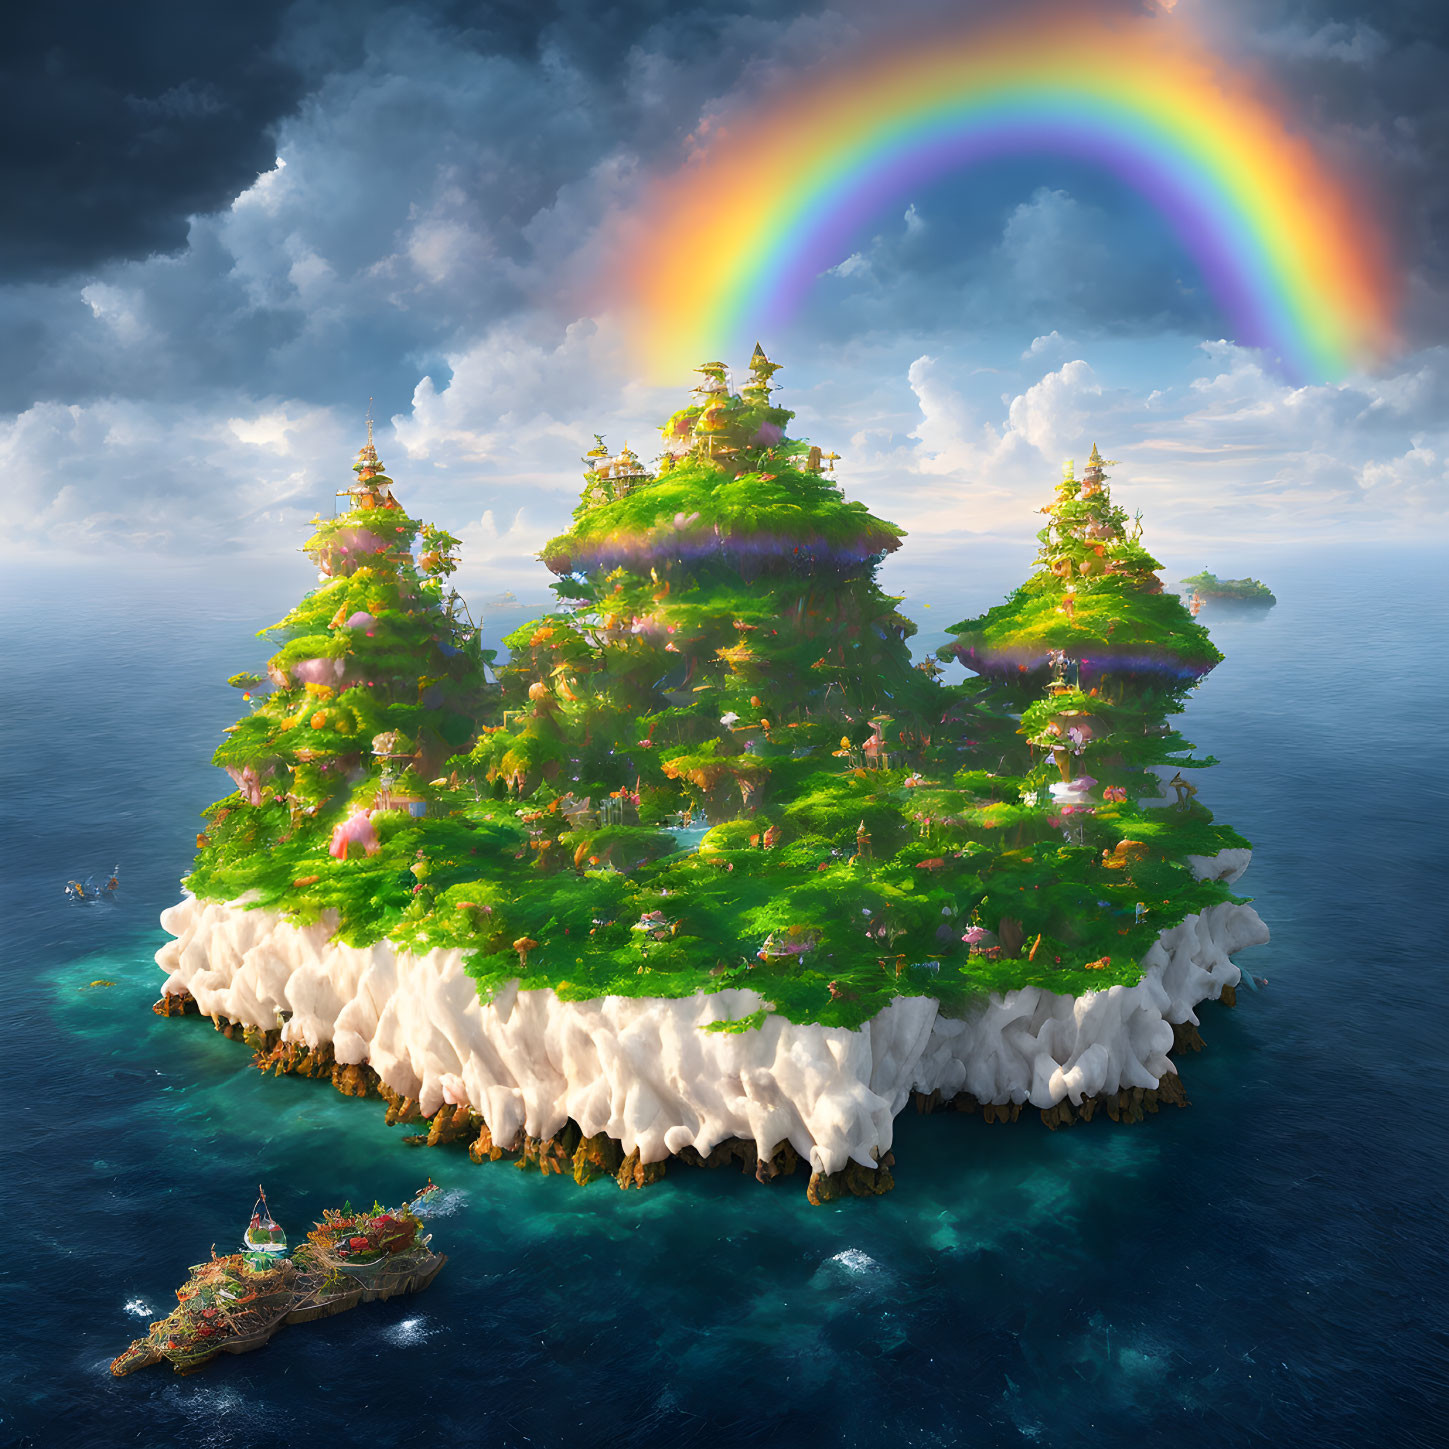 Lush island landscape with rainbow, waterfalls, cliffs, and boat